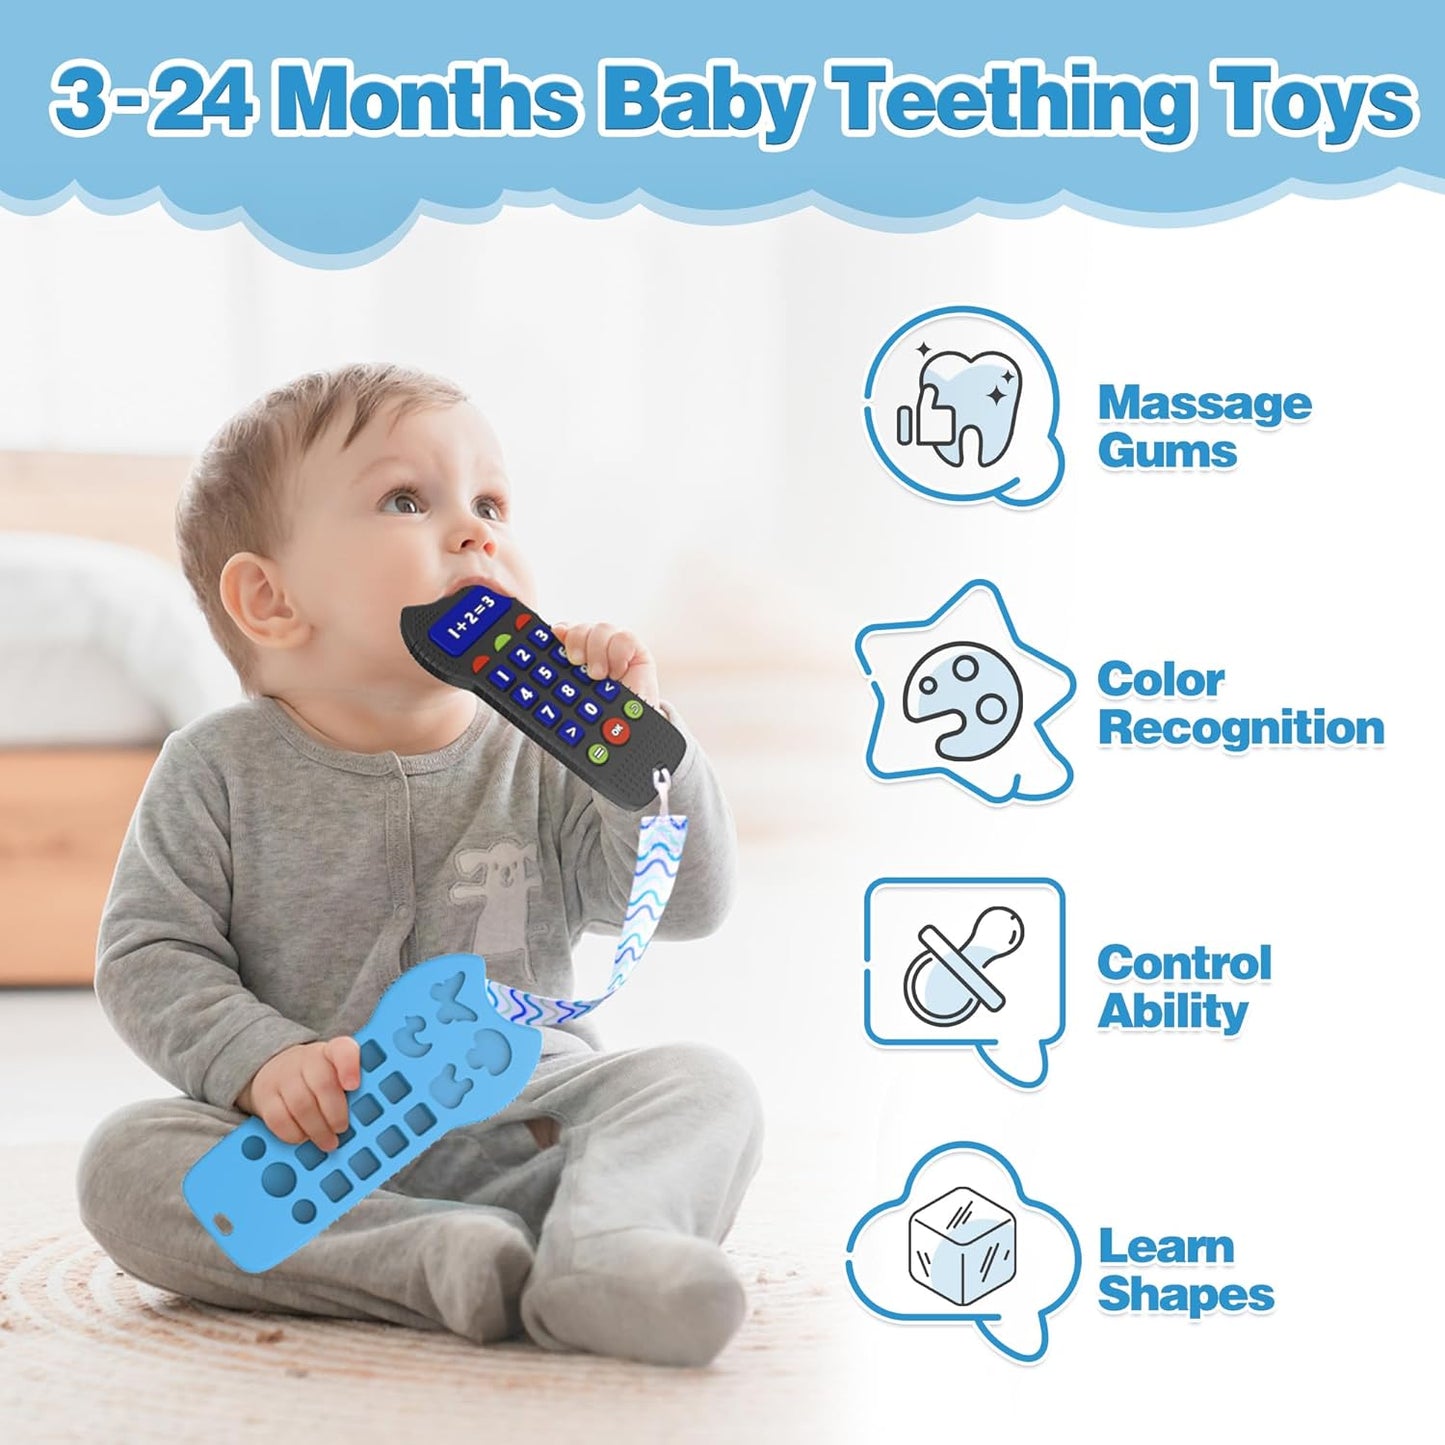 Safeswee 2 Pack Silicone Baby Teether Toys, Montessori Teething Toys for Babies 6-12 Months, Calculator Shape Remote Teether Baby Chew Toys Set, Baby Sensory Teething Teether Toys for Boys and Girls